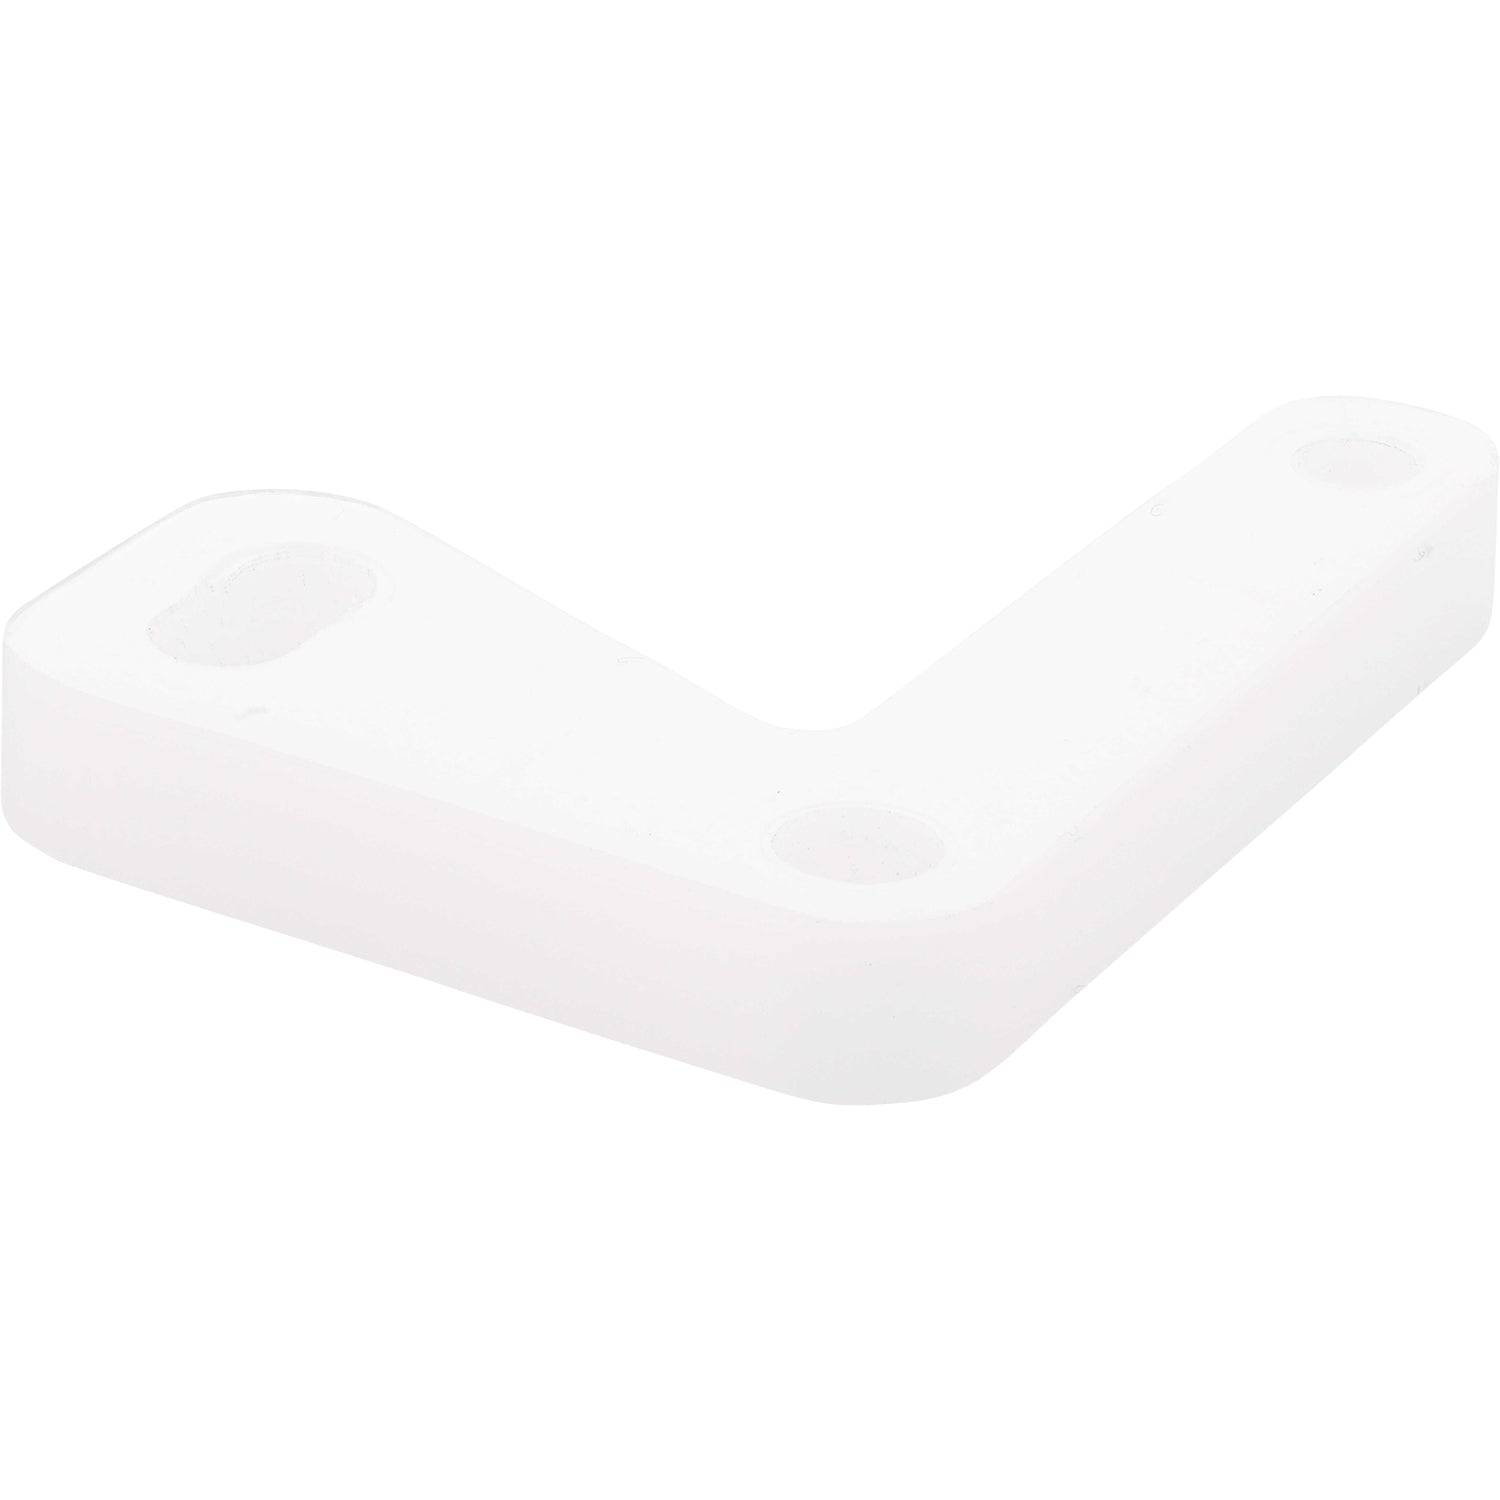 White L shaped plastic part with three holes cut into it for mounting purposes. Part shown on white background. 